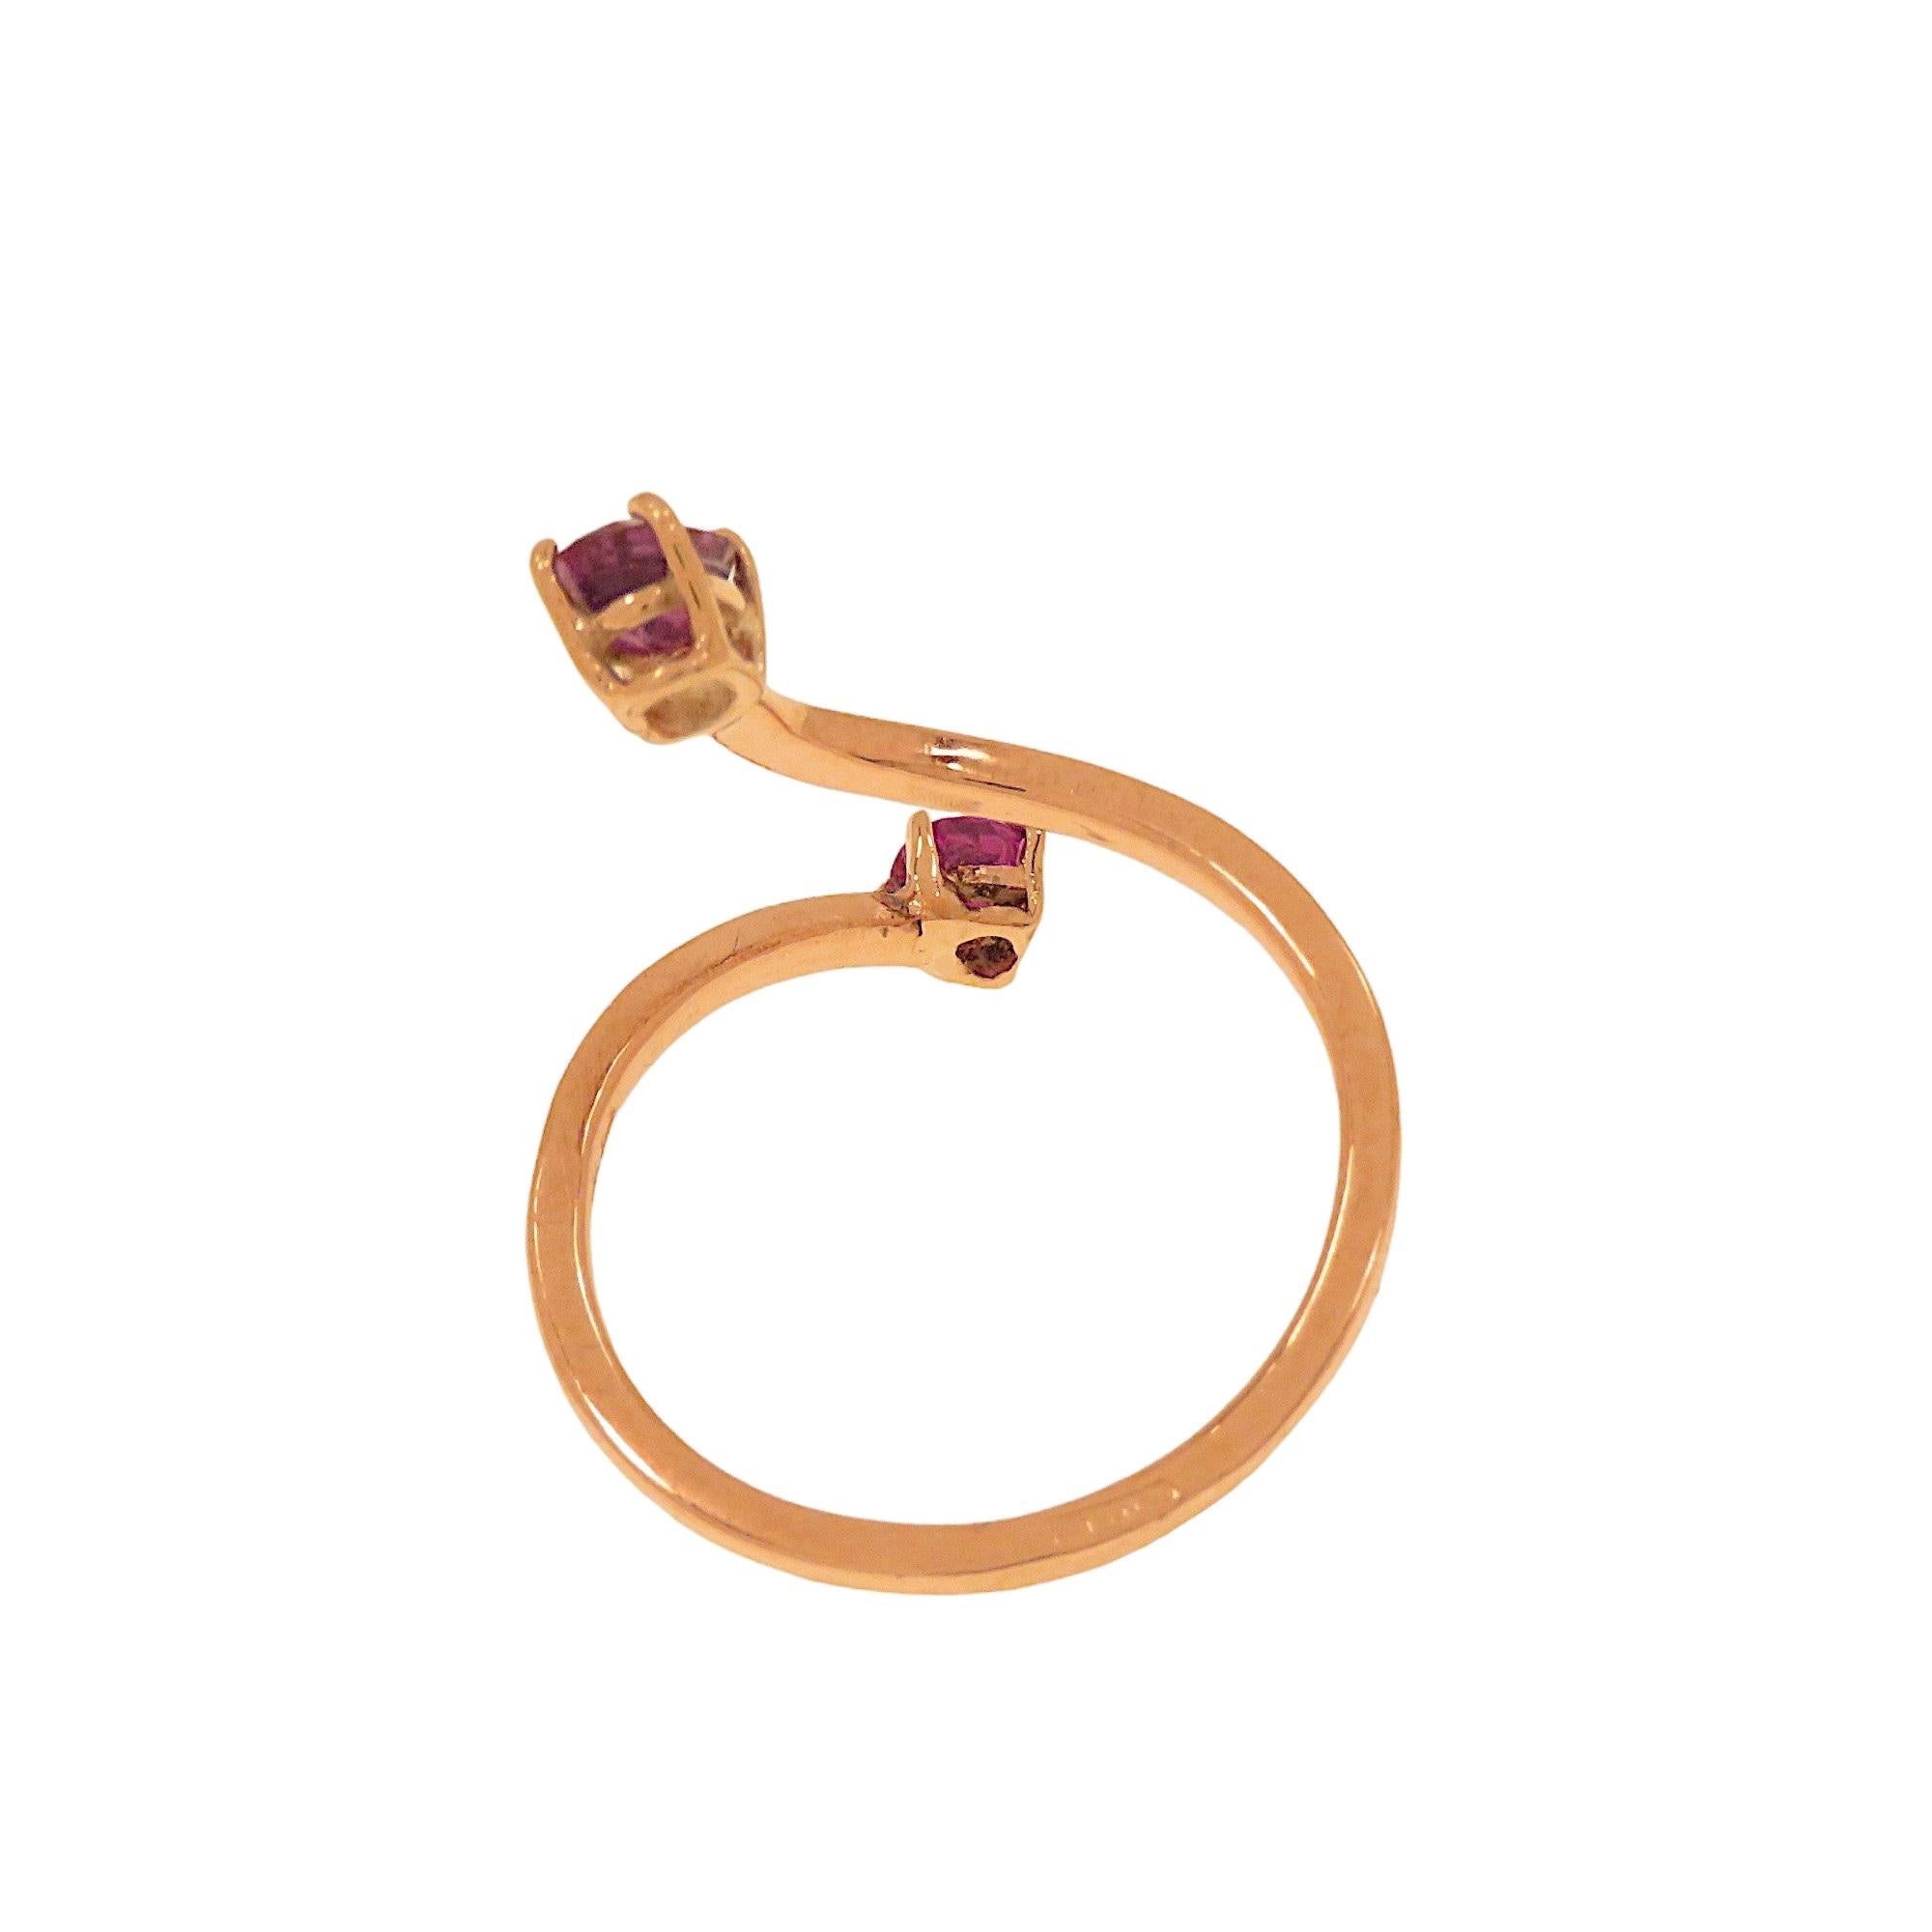 Botta jewelry rose gold ruby ring made in Italy For Sale 4